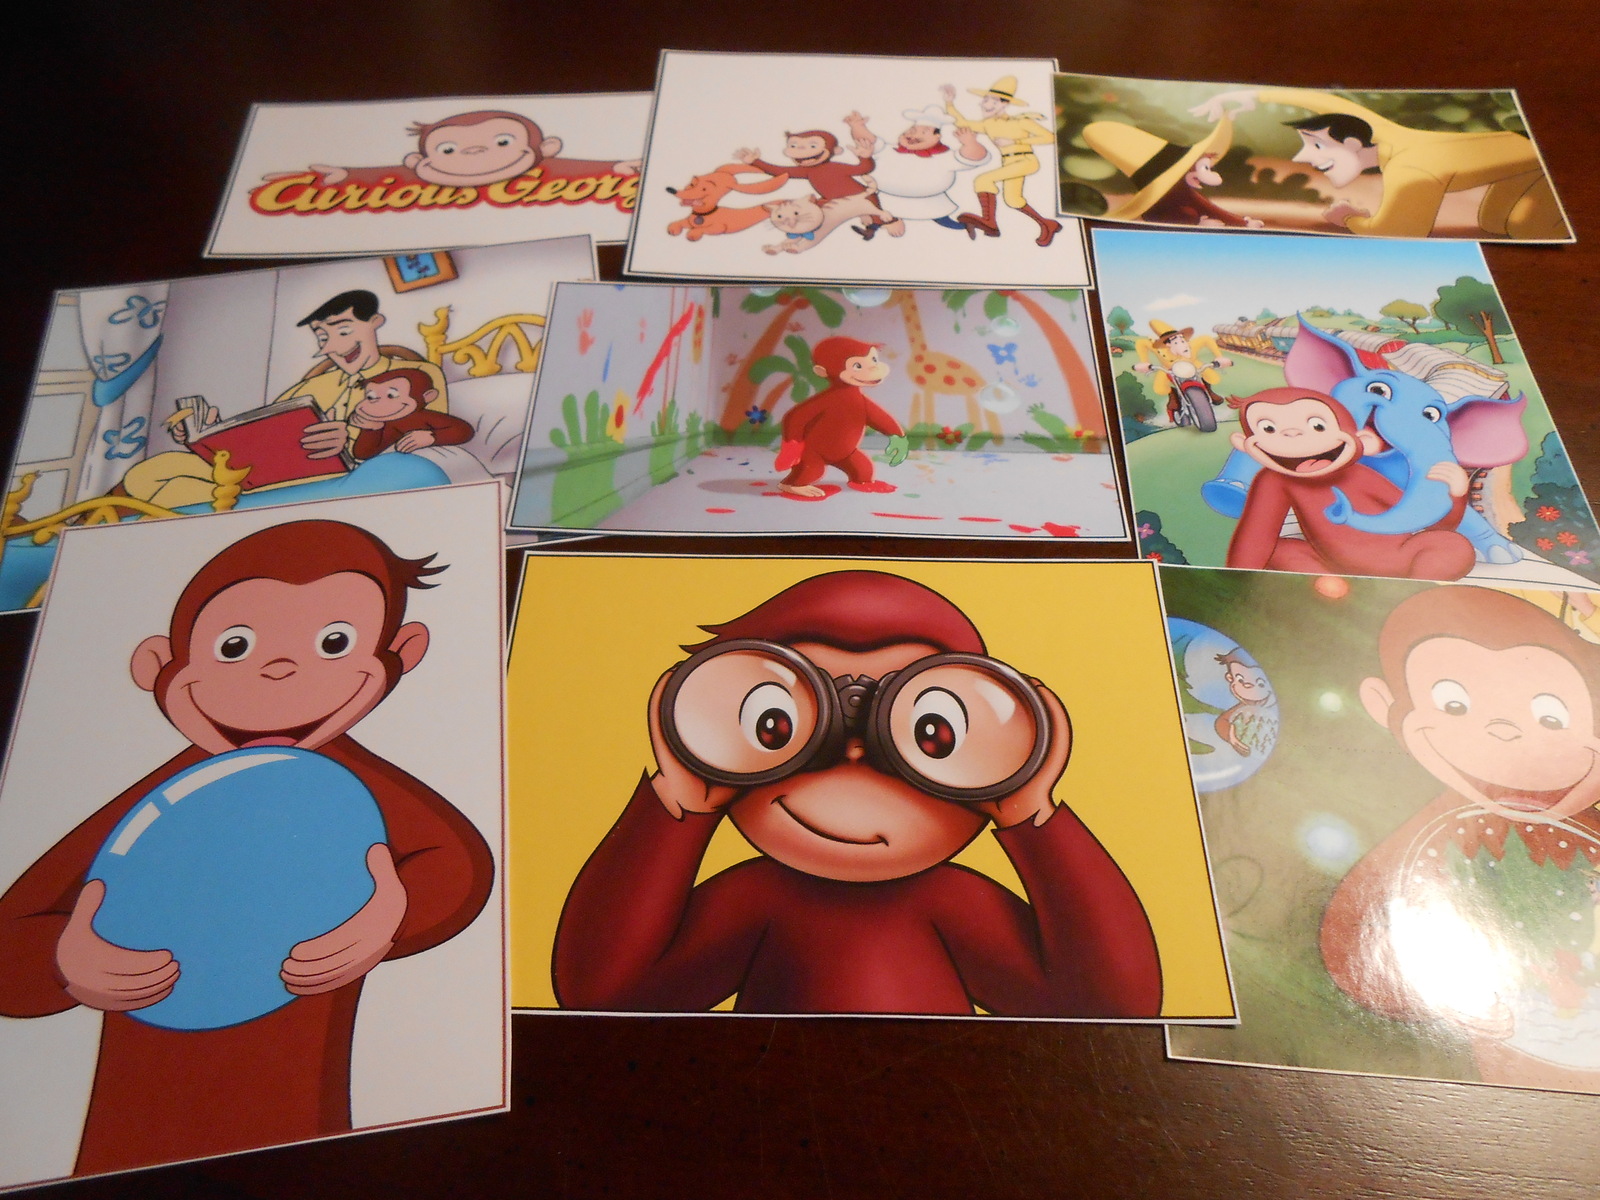 9 Curious George Stickers, Party Supplies, Favors, labels, Birthday, Gifts, Bags - $11.99